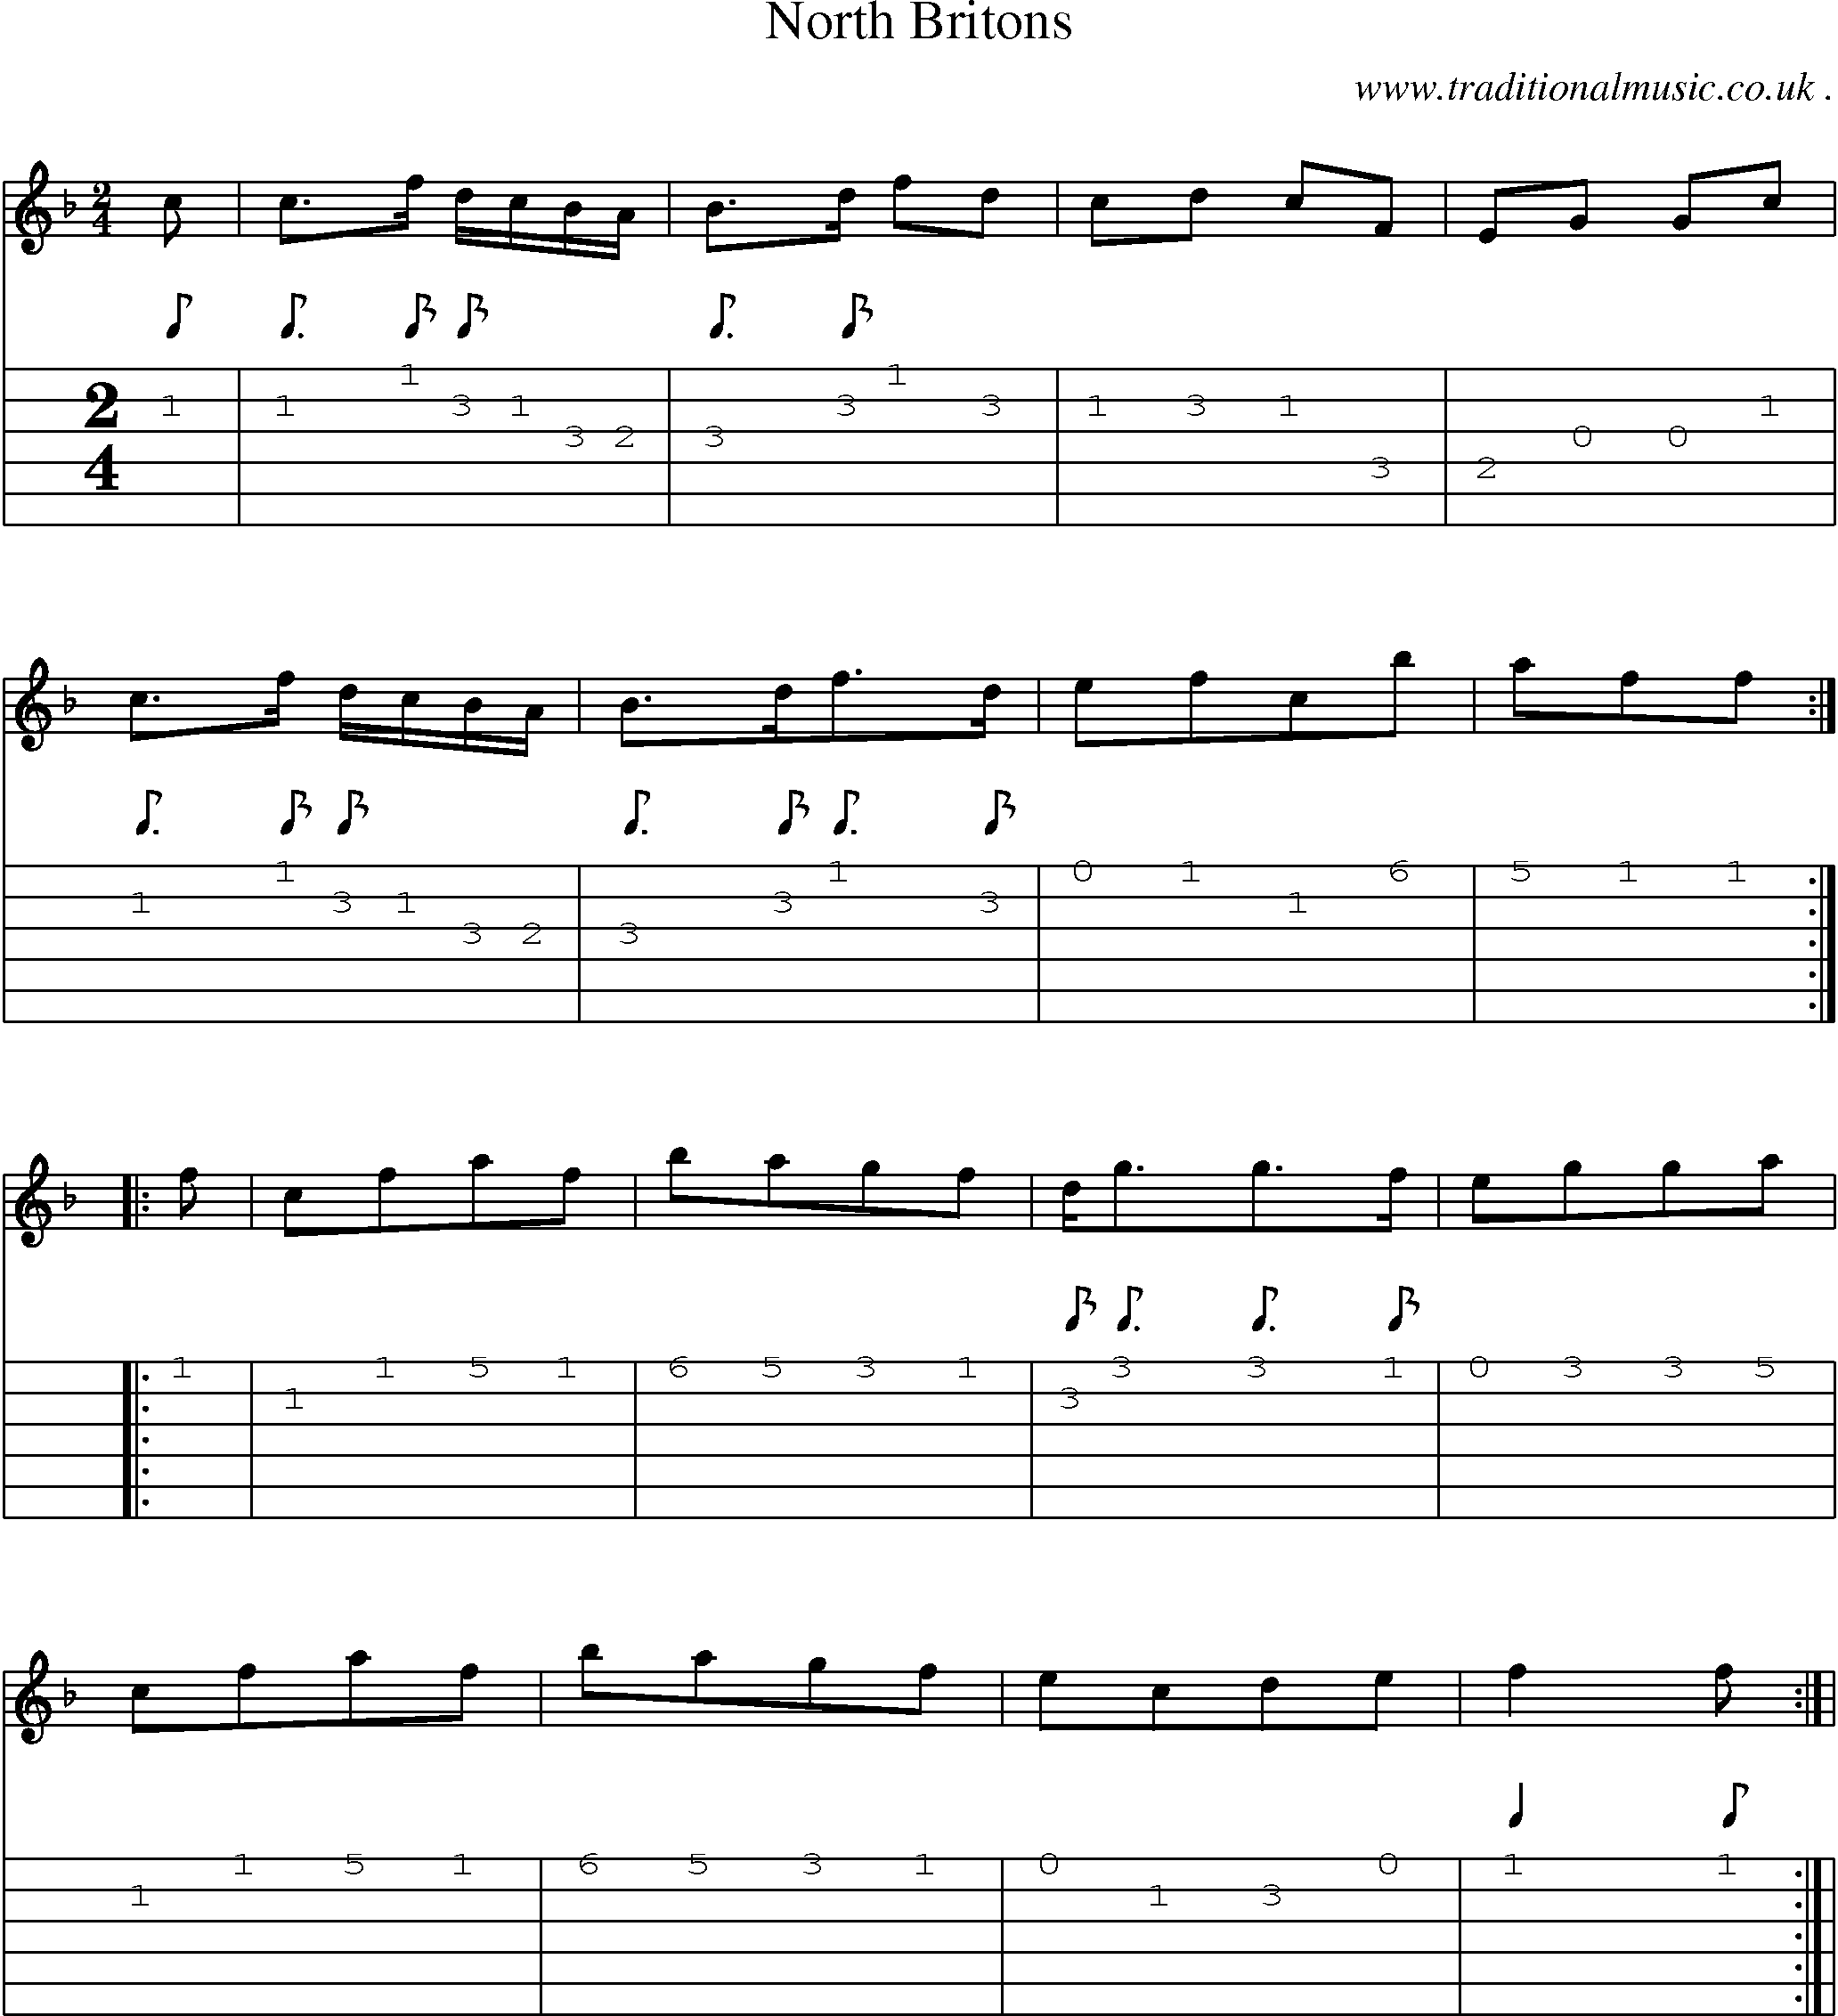 Sheet-Music and Guitar Tabs for North Britons